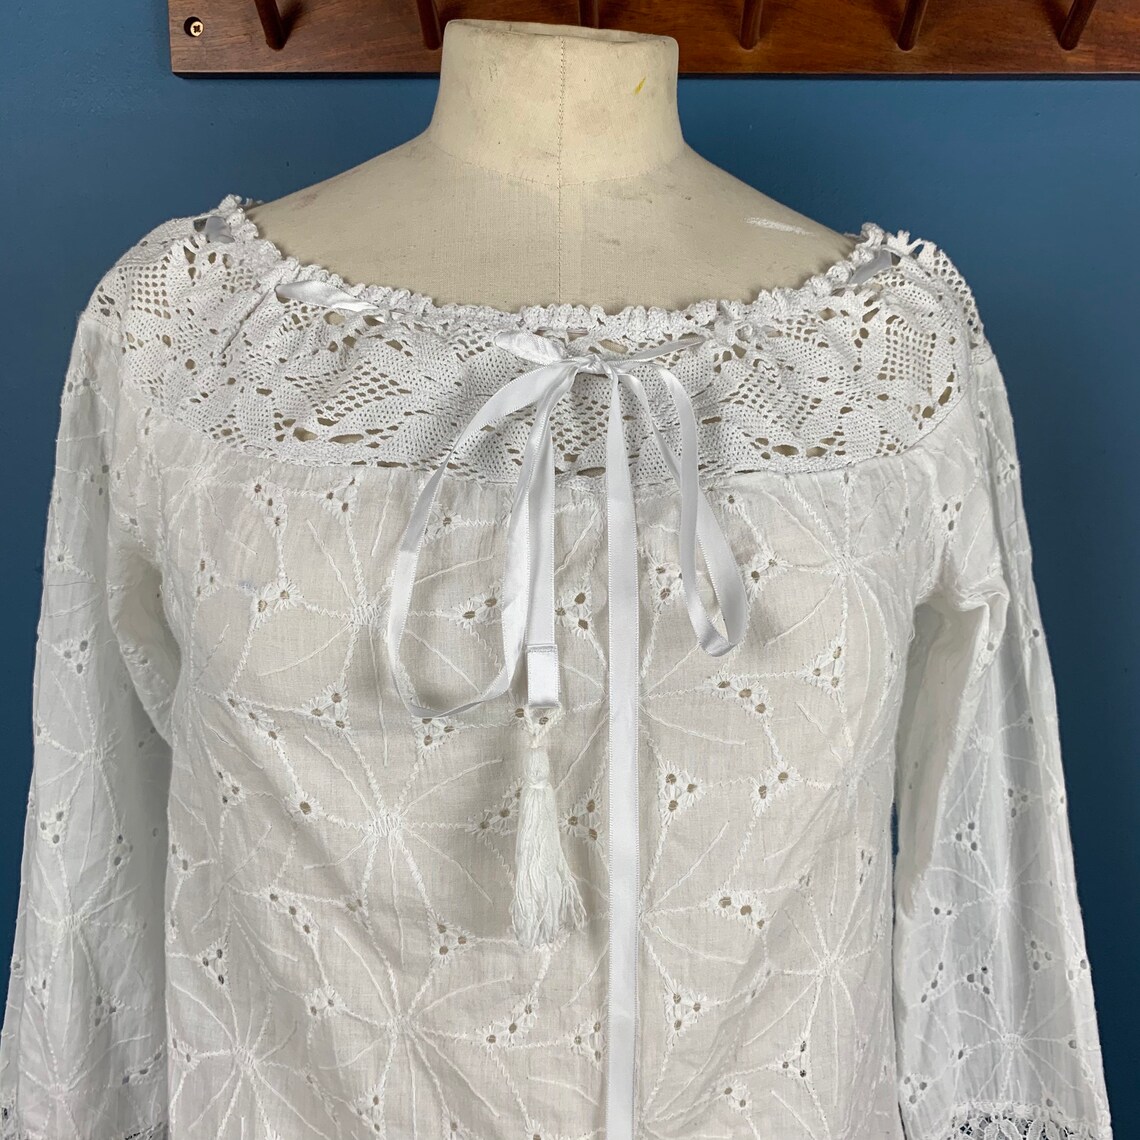 Vintage broderie englaise shirt with lace details | Etsy